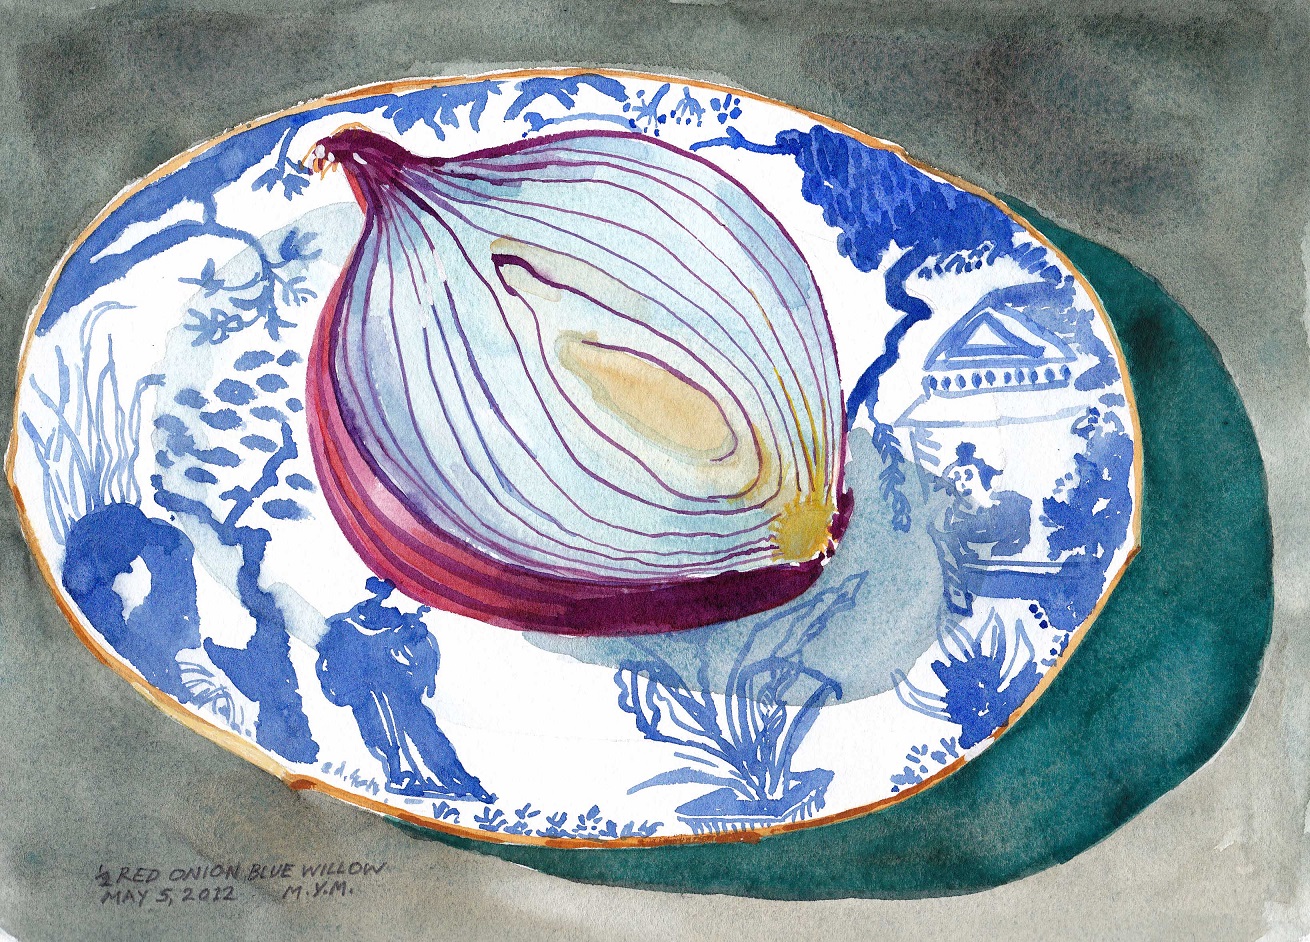 SOLD 2022 May 5 Half Red Onion, Blue Willow